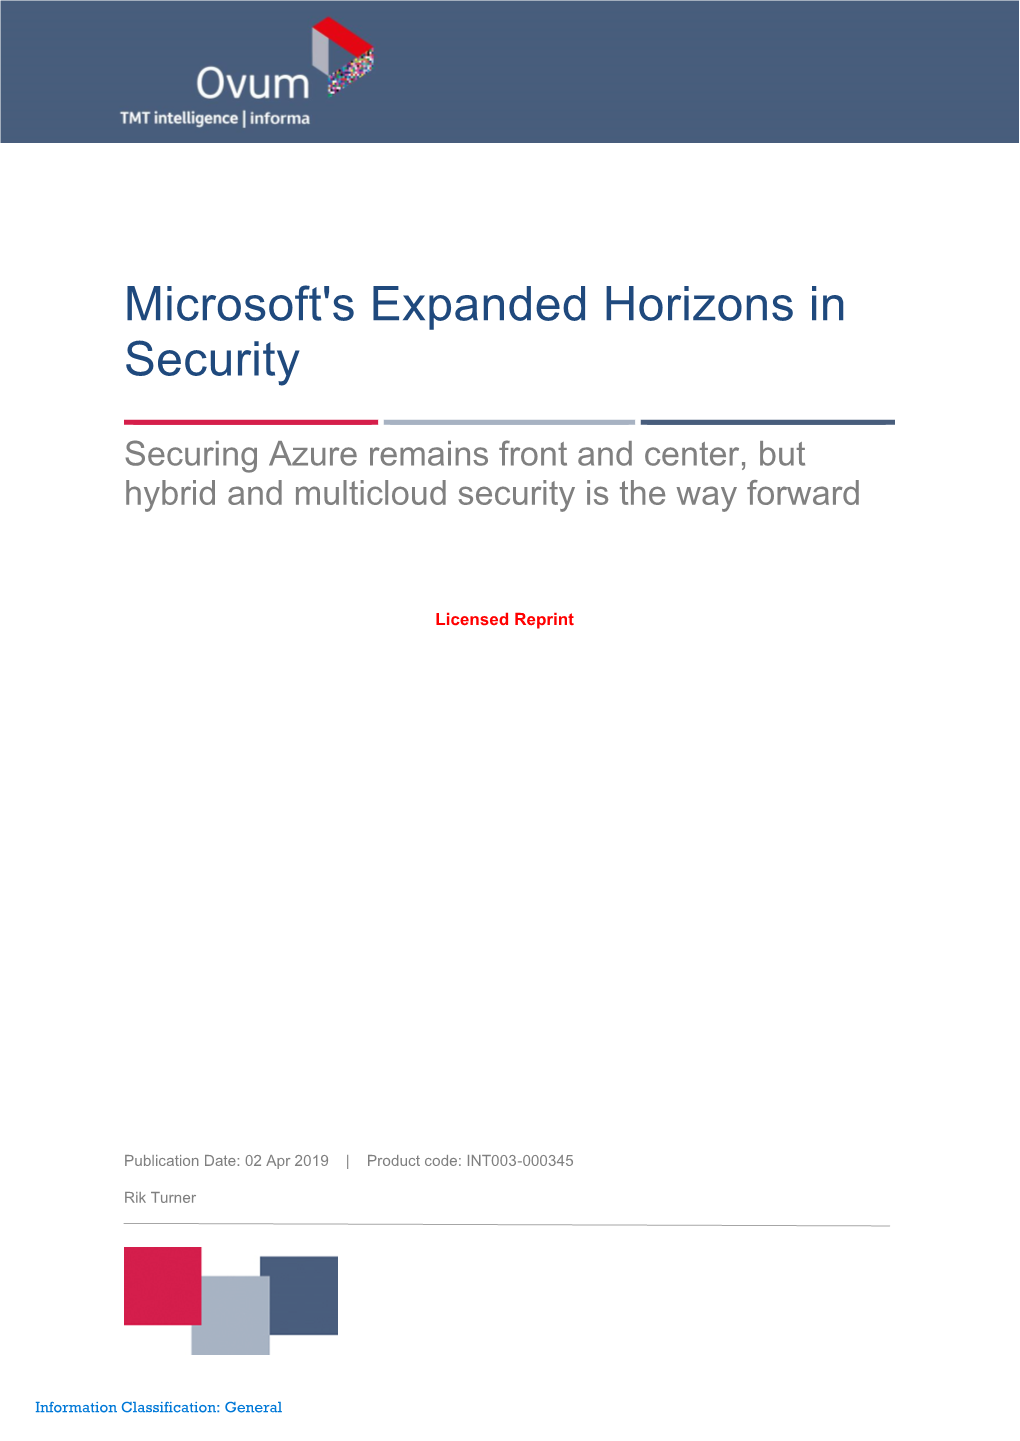 Microsoft's Expanded Horizons in Security